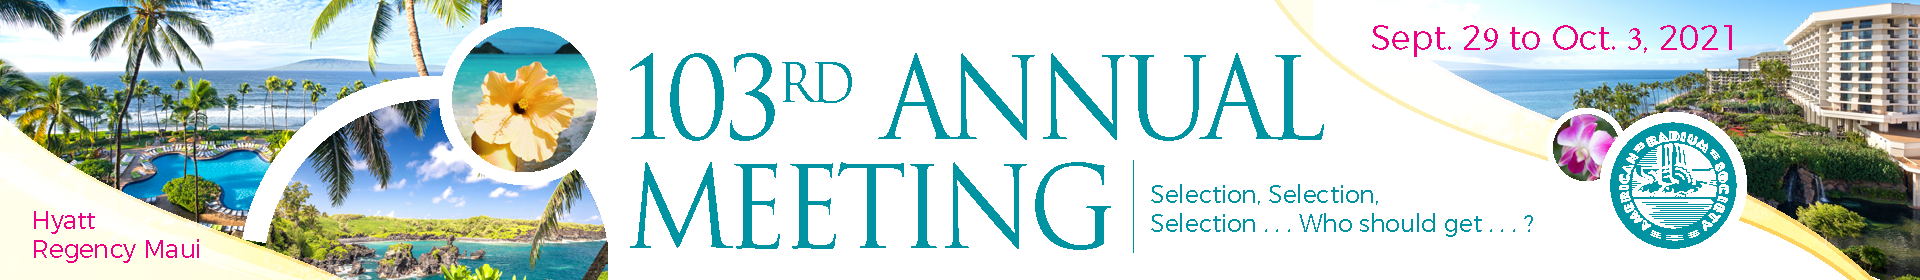 2021 Annual Meeting Event Banner